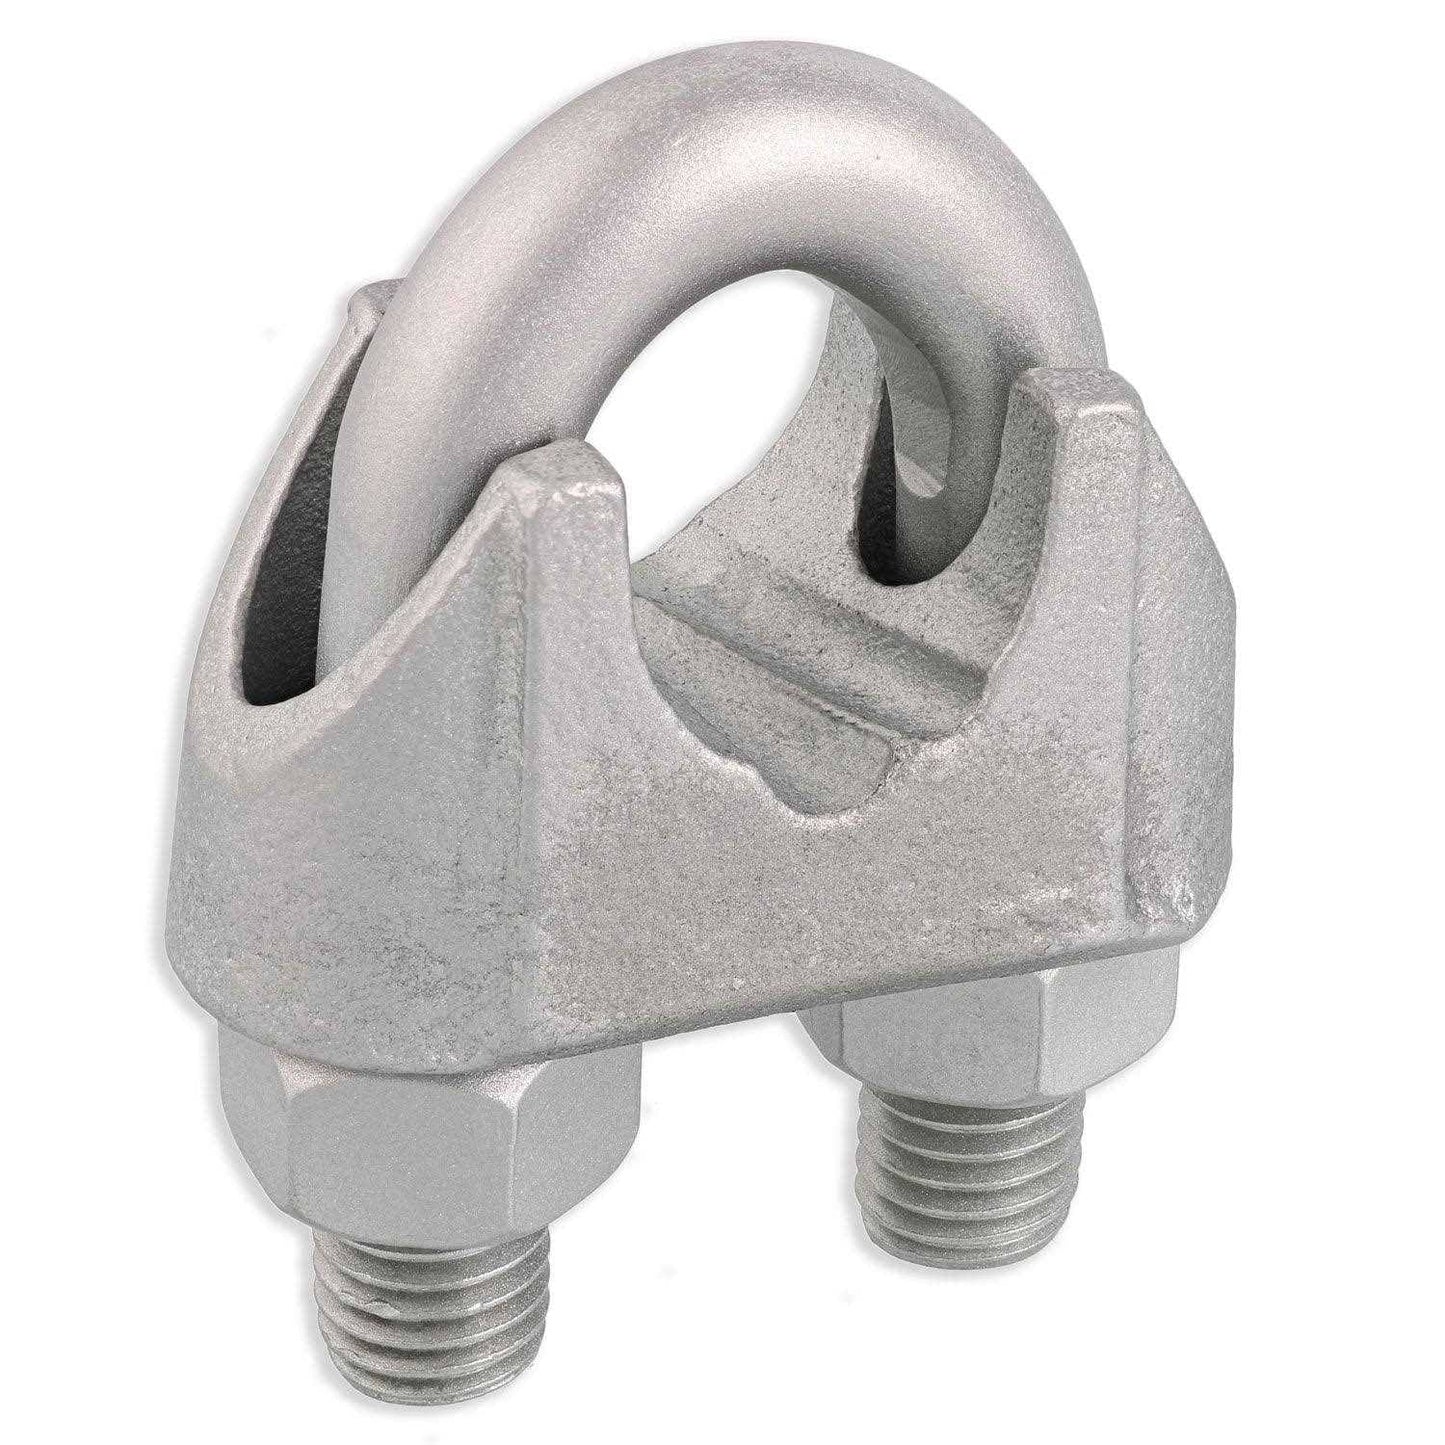 7/8" Zinc Plated Malleable Wire Rope Clip - Non-Lifting Type